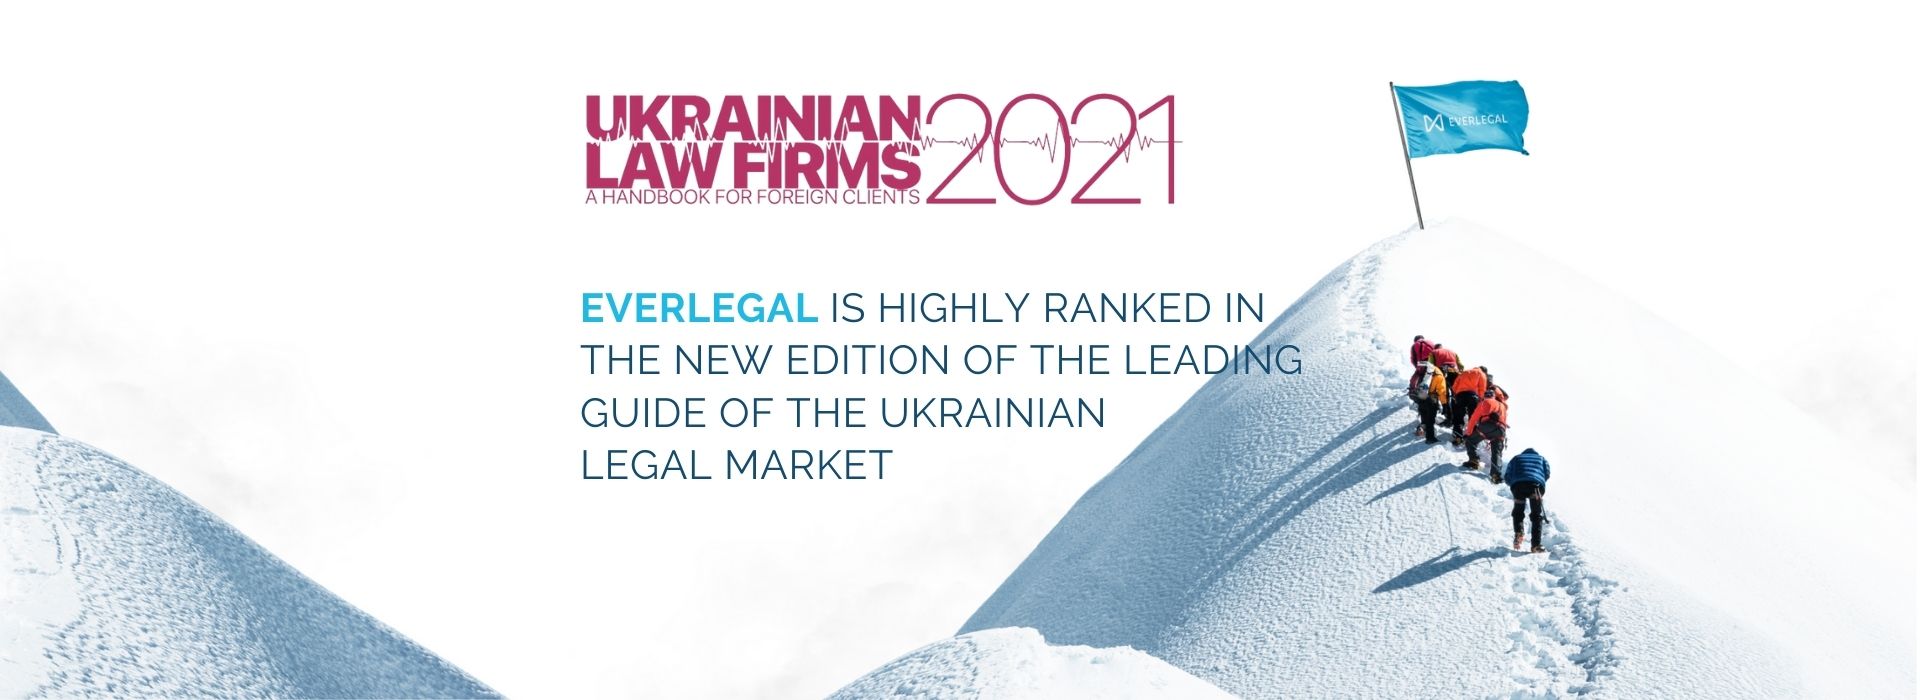 EVERLEGAL in “Ukrainian Law Firms. A Handbook for Foreign Clients 2021” Ranking